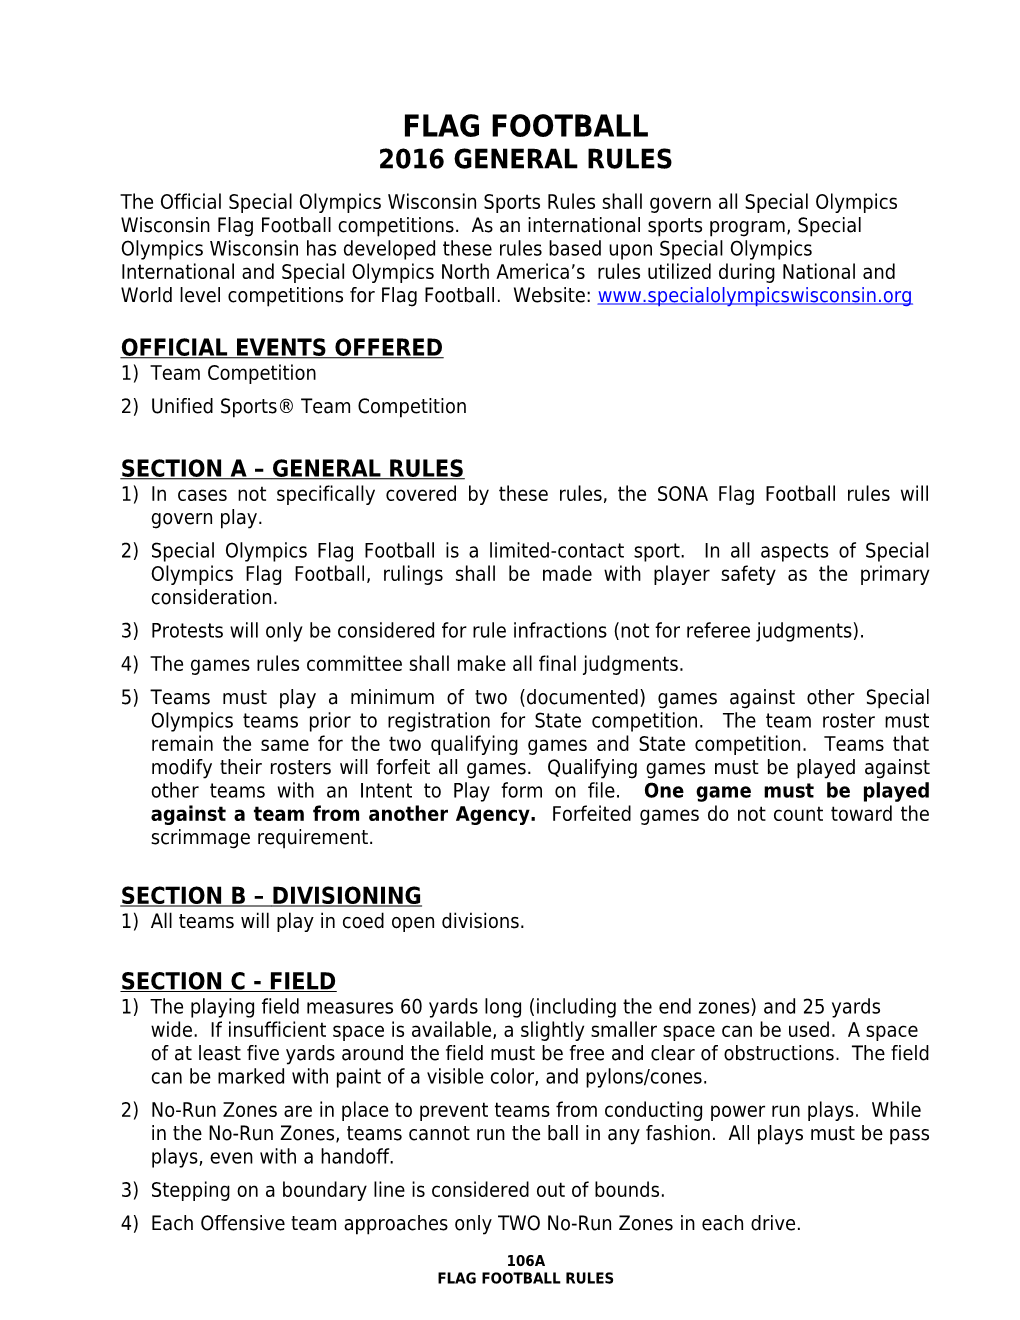 2016 General Rules